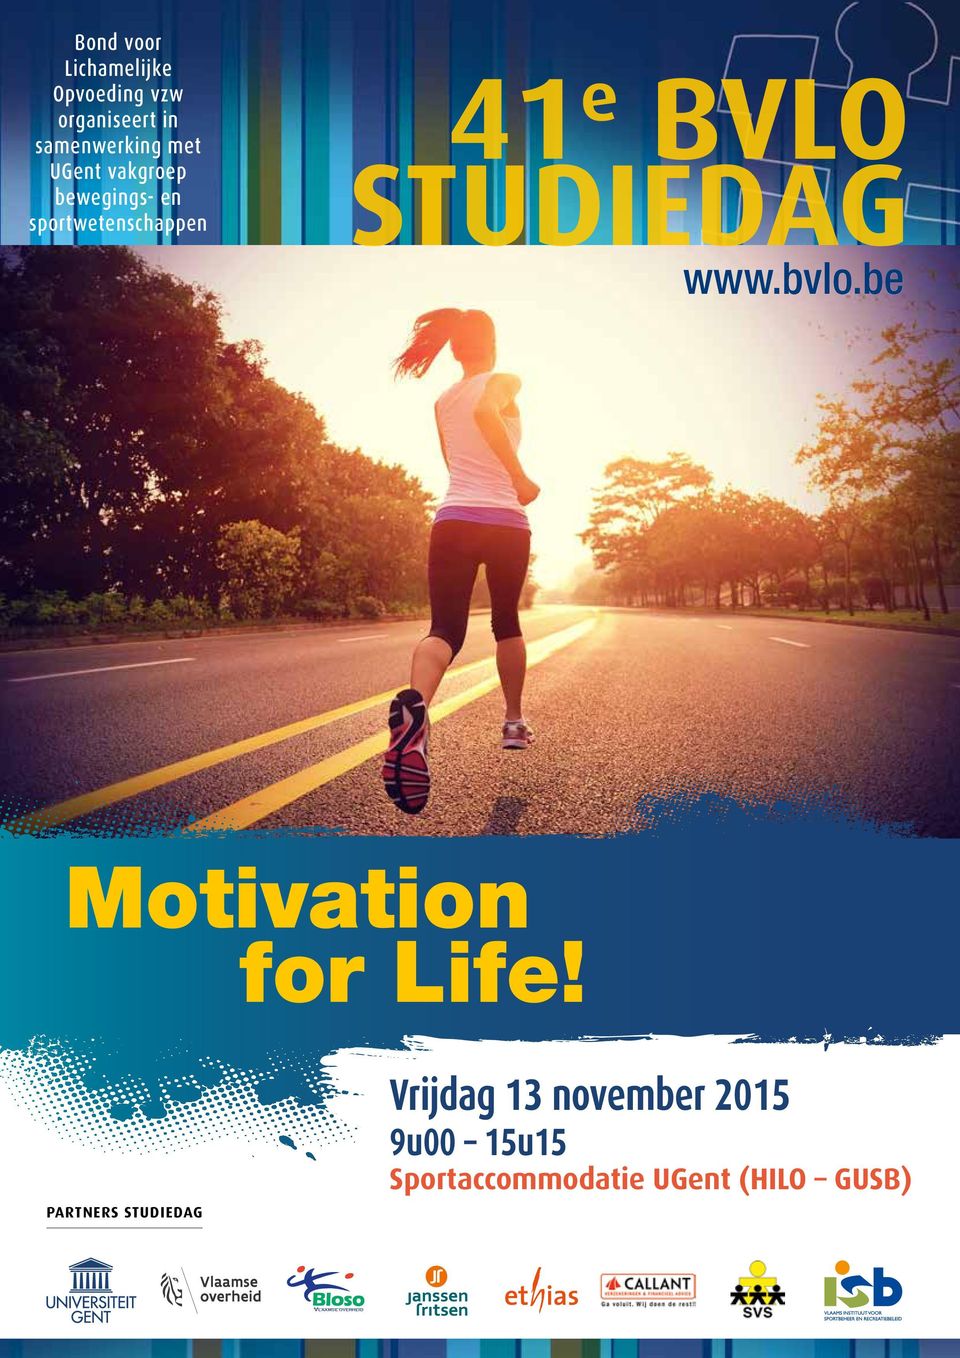 www.bvlo.be Motivation for Life!